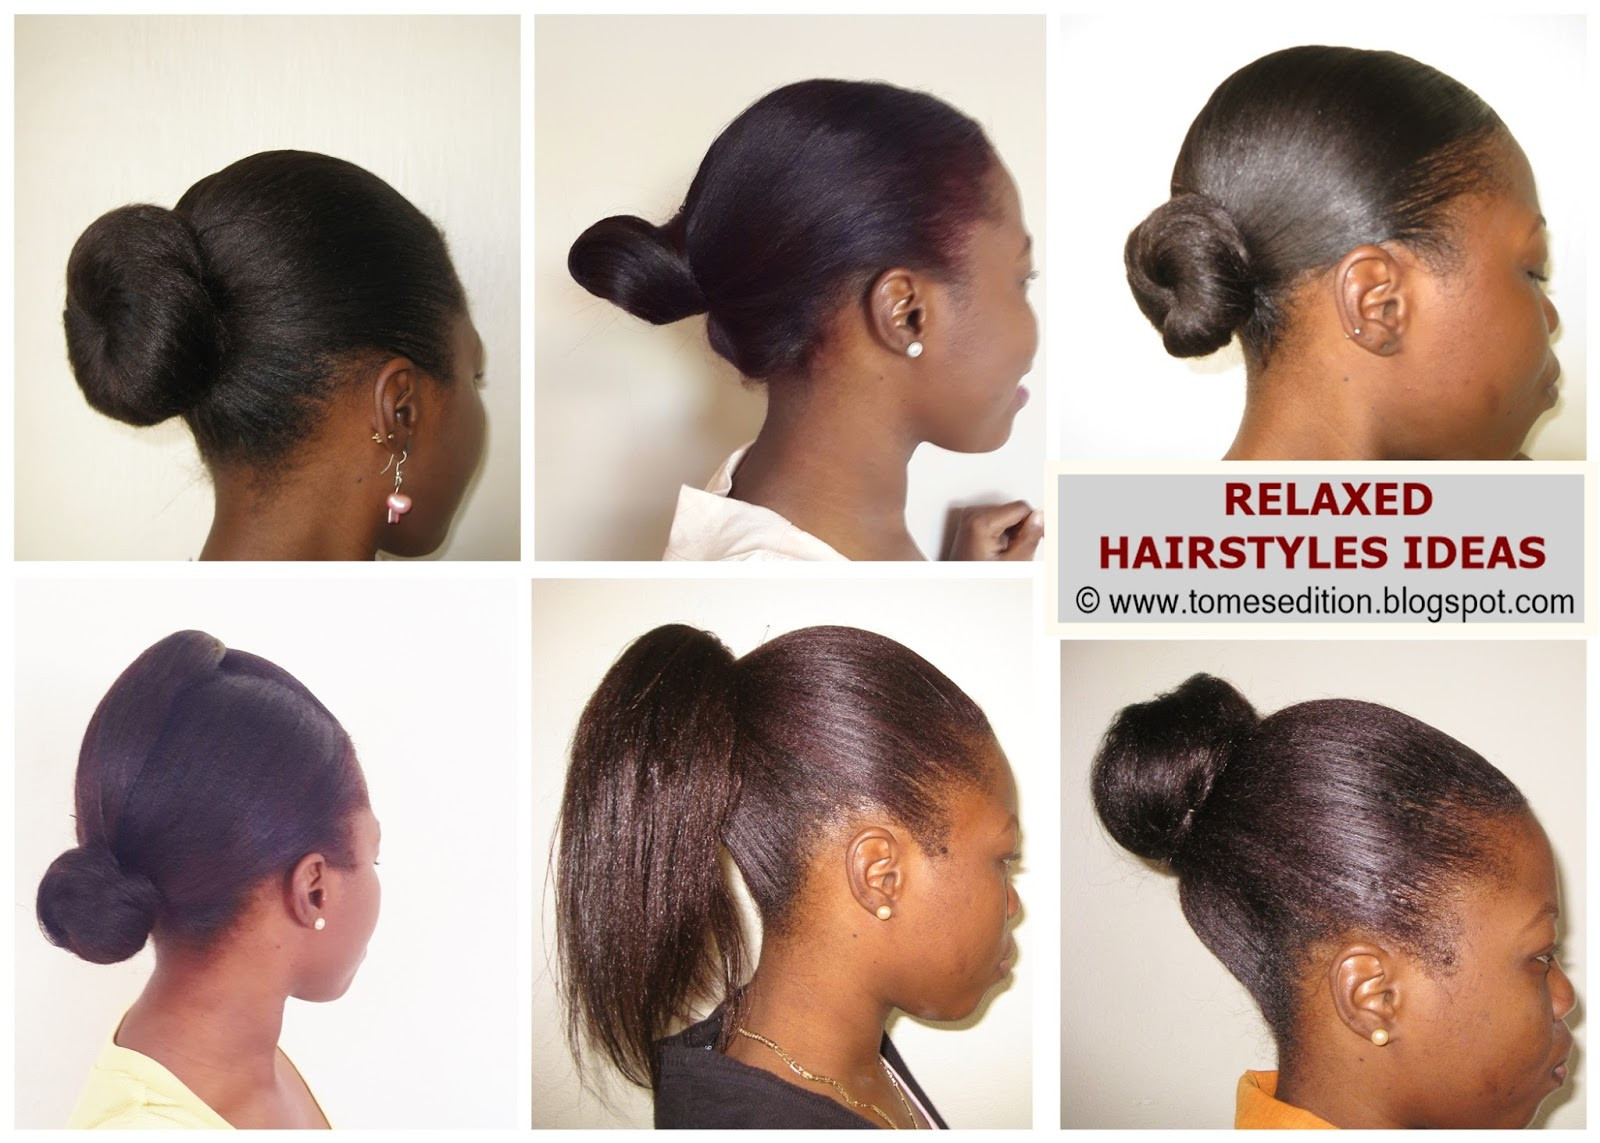 Cute Protective Hairstyles For Relaxed Hair
 Tomes Edition Favorite Ways To Style My Relaxed Hair